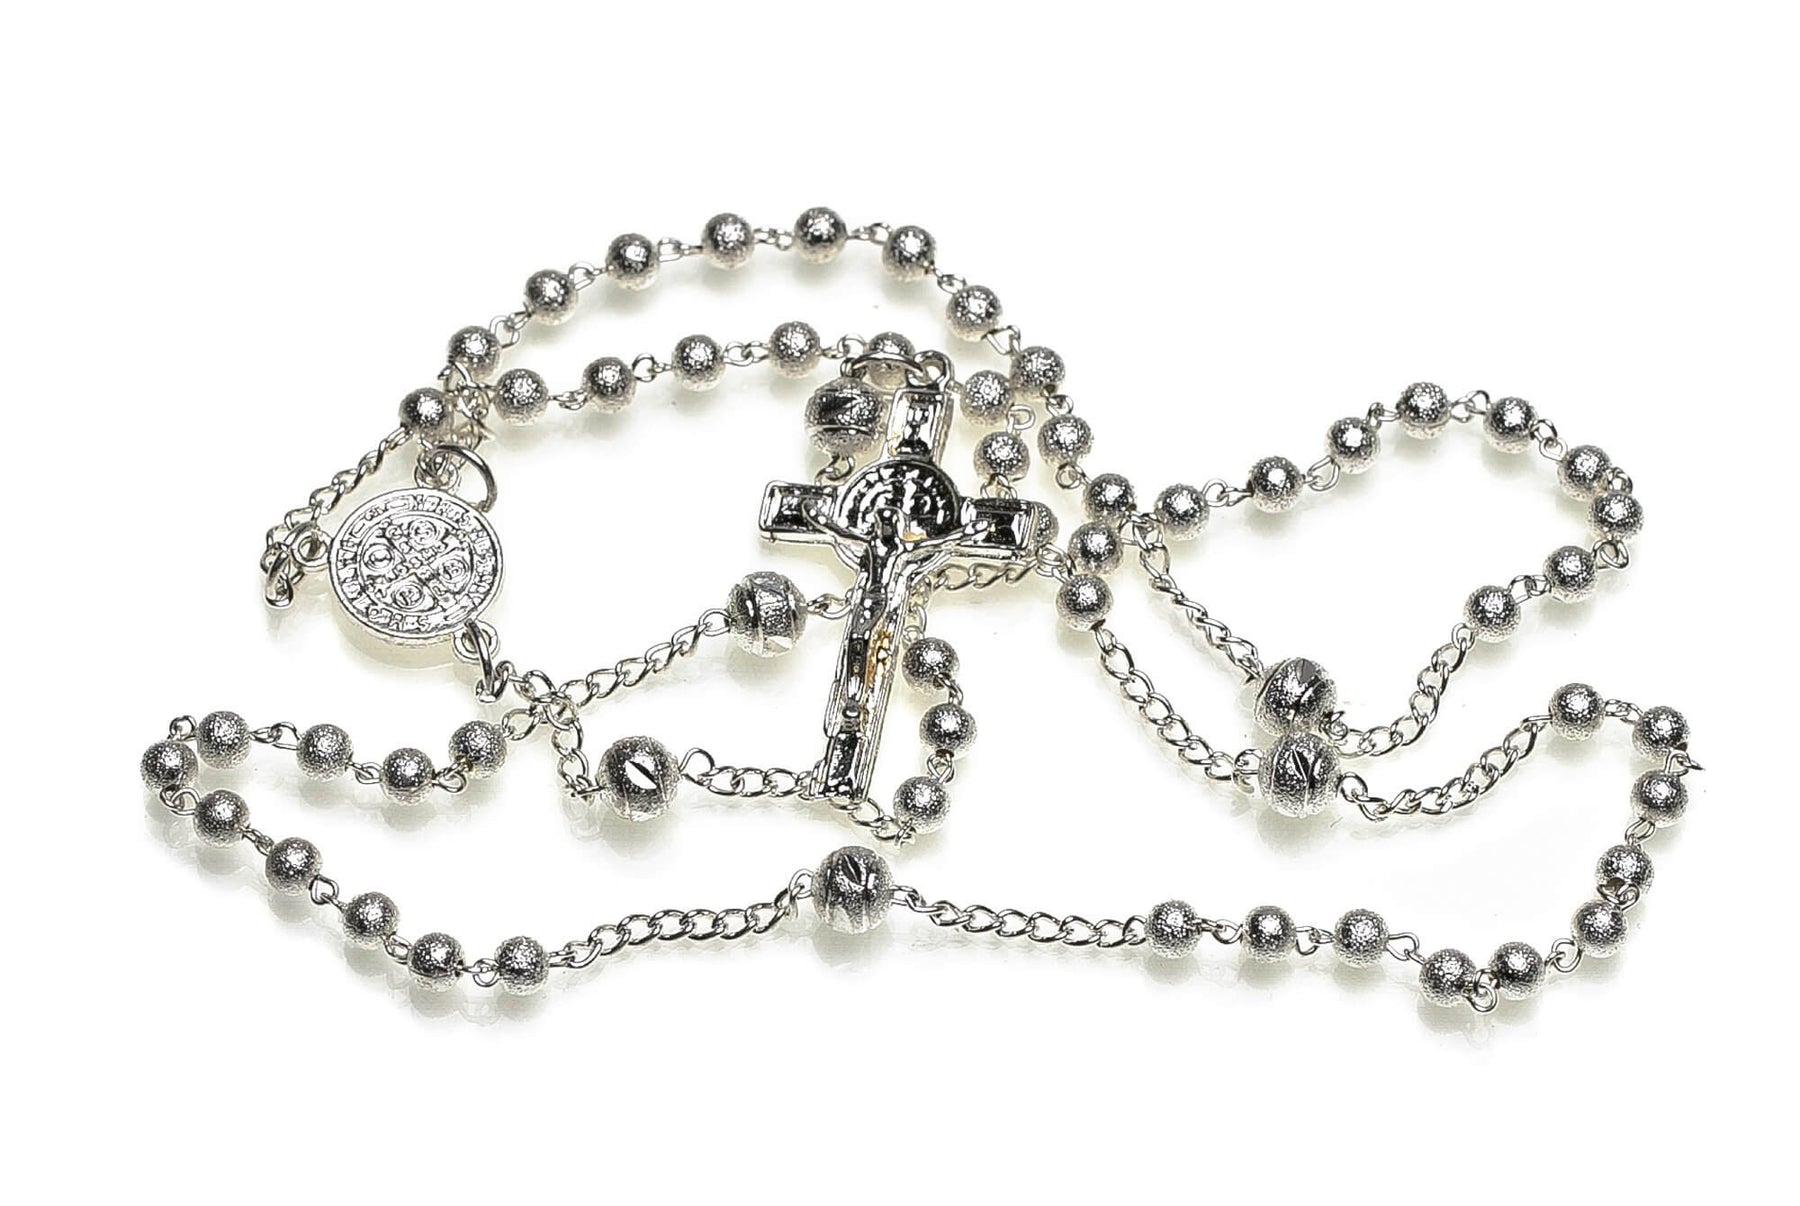 Handcrafted rosary in its standard fifteen Mysteries of the traditional Rosary. This item was designed based on the long-standing custom that was established by Pope Pius V in the 16th century.